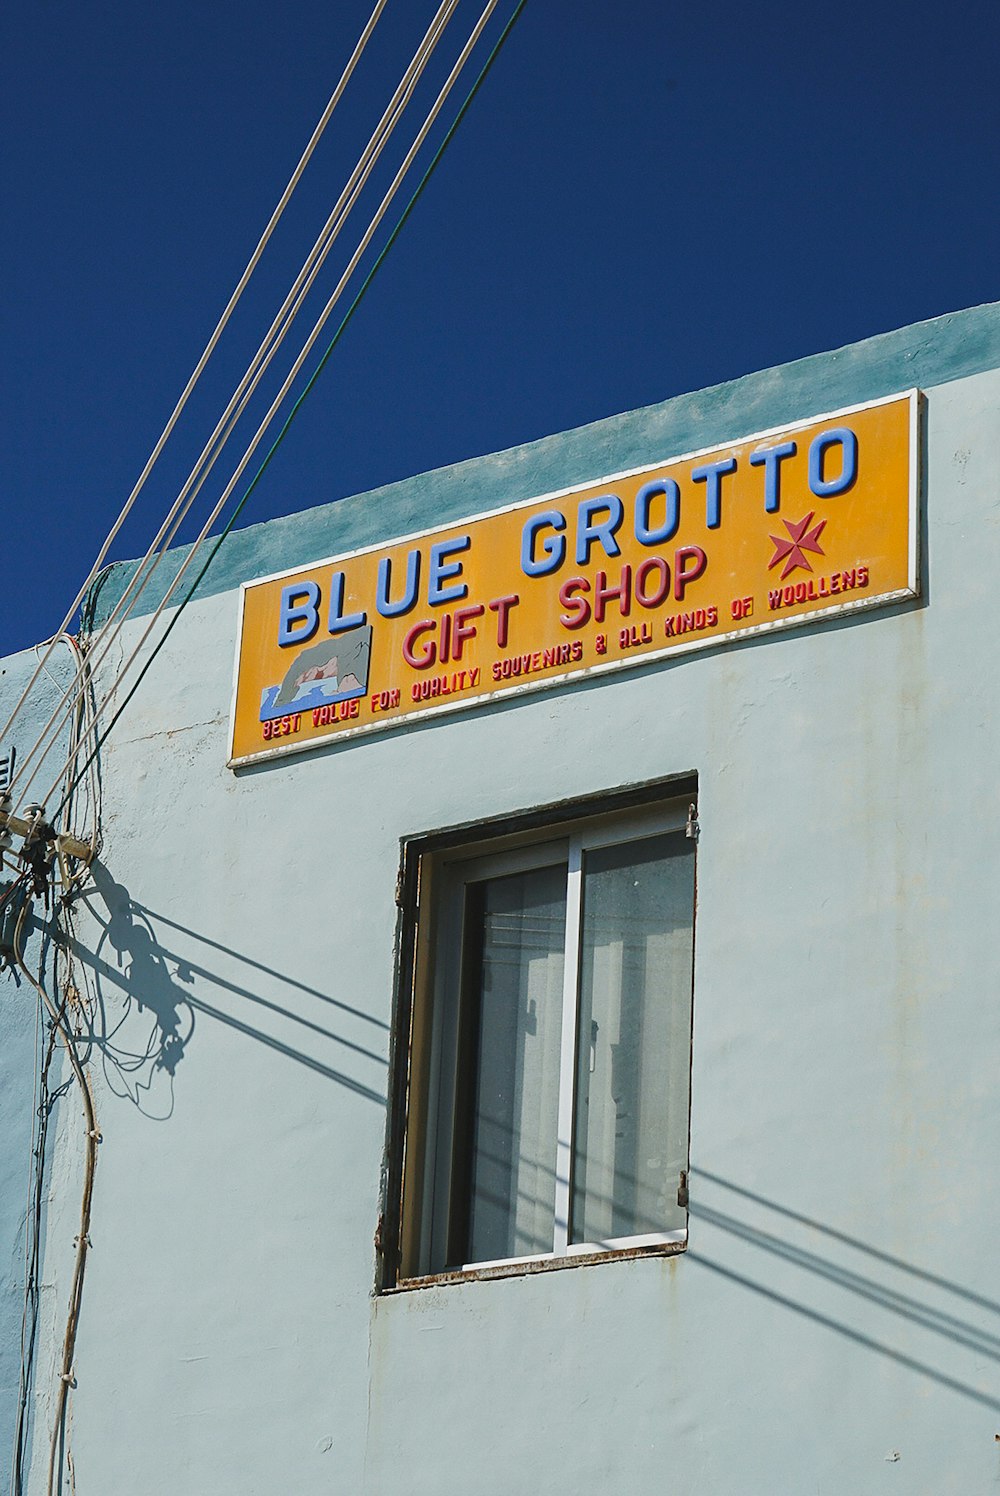 a sign on a building that says blue grottoo git shop